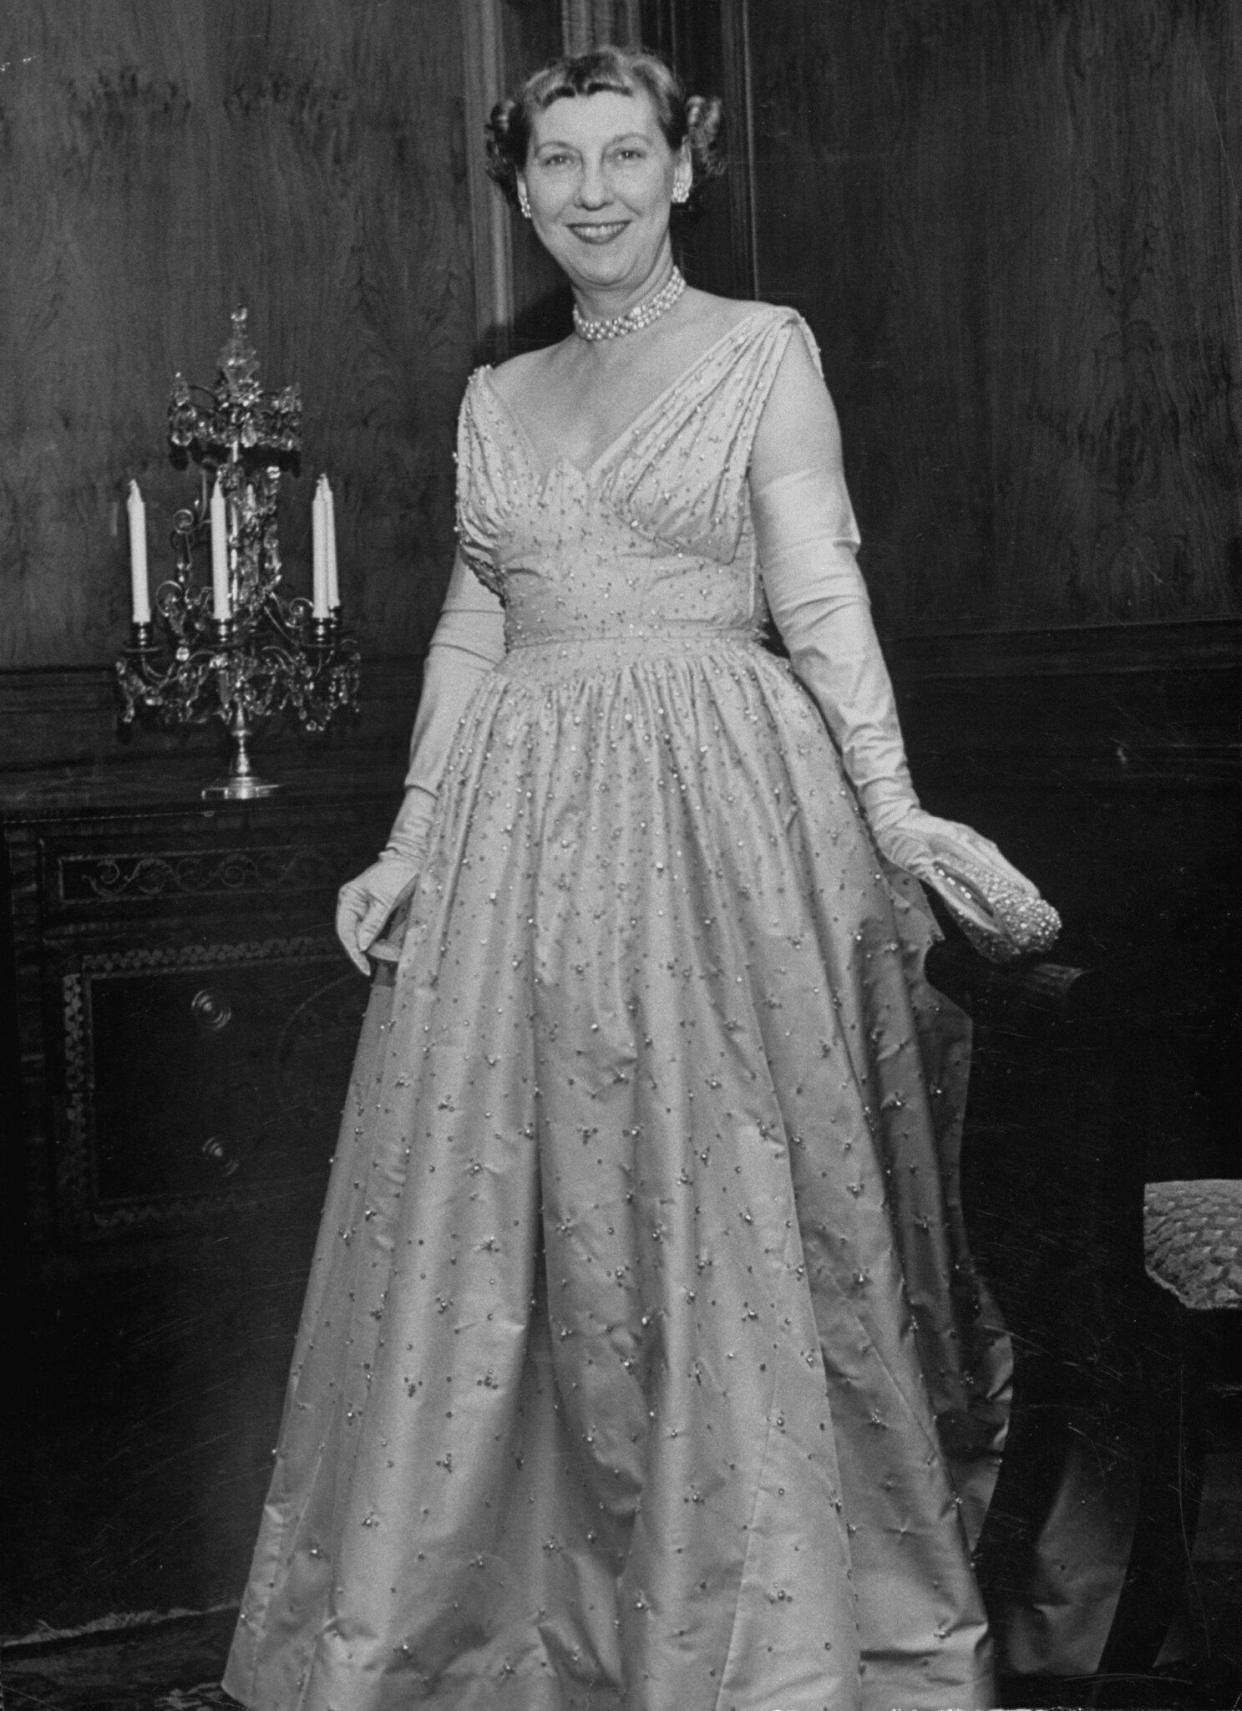 Mamie Eisenhower shows off the gown she wore for inaugural balls in 1953.